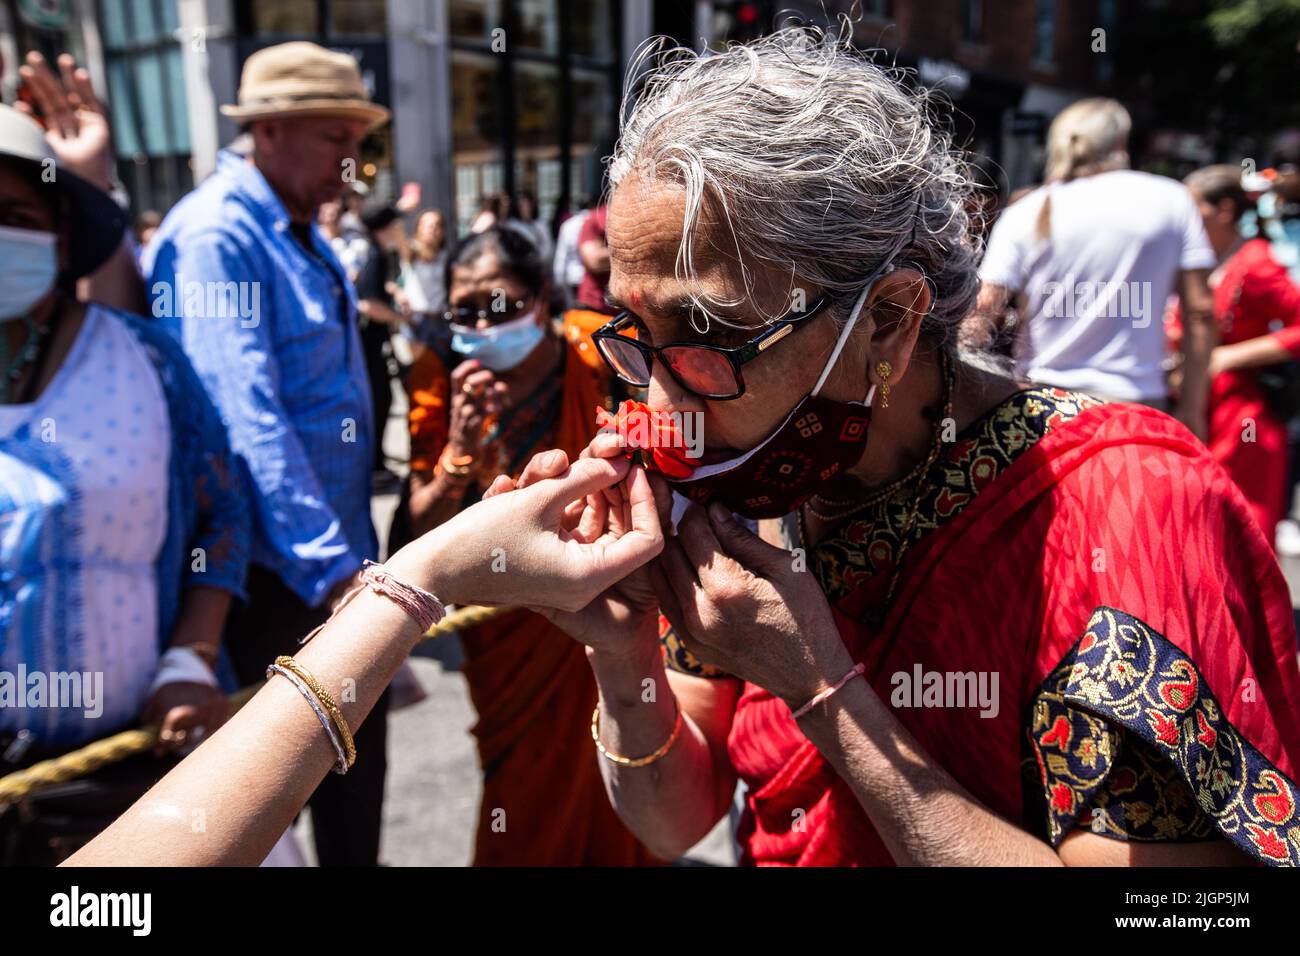 A devotee smells on a rose thrown from the main cart during the celebration. Stock Photo